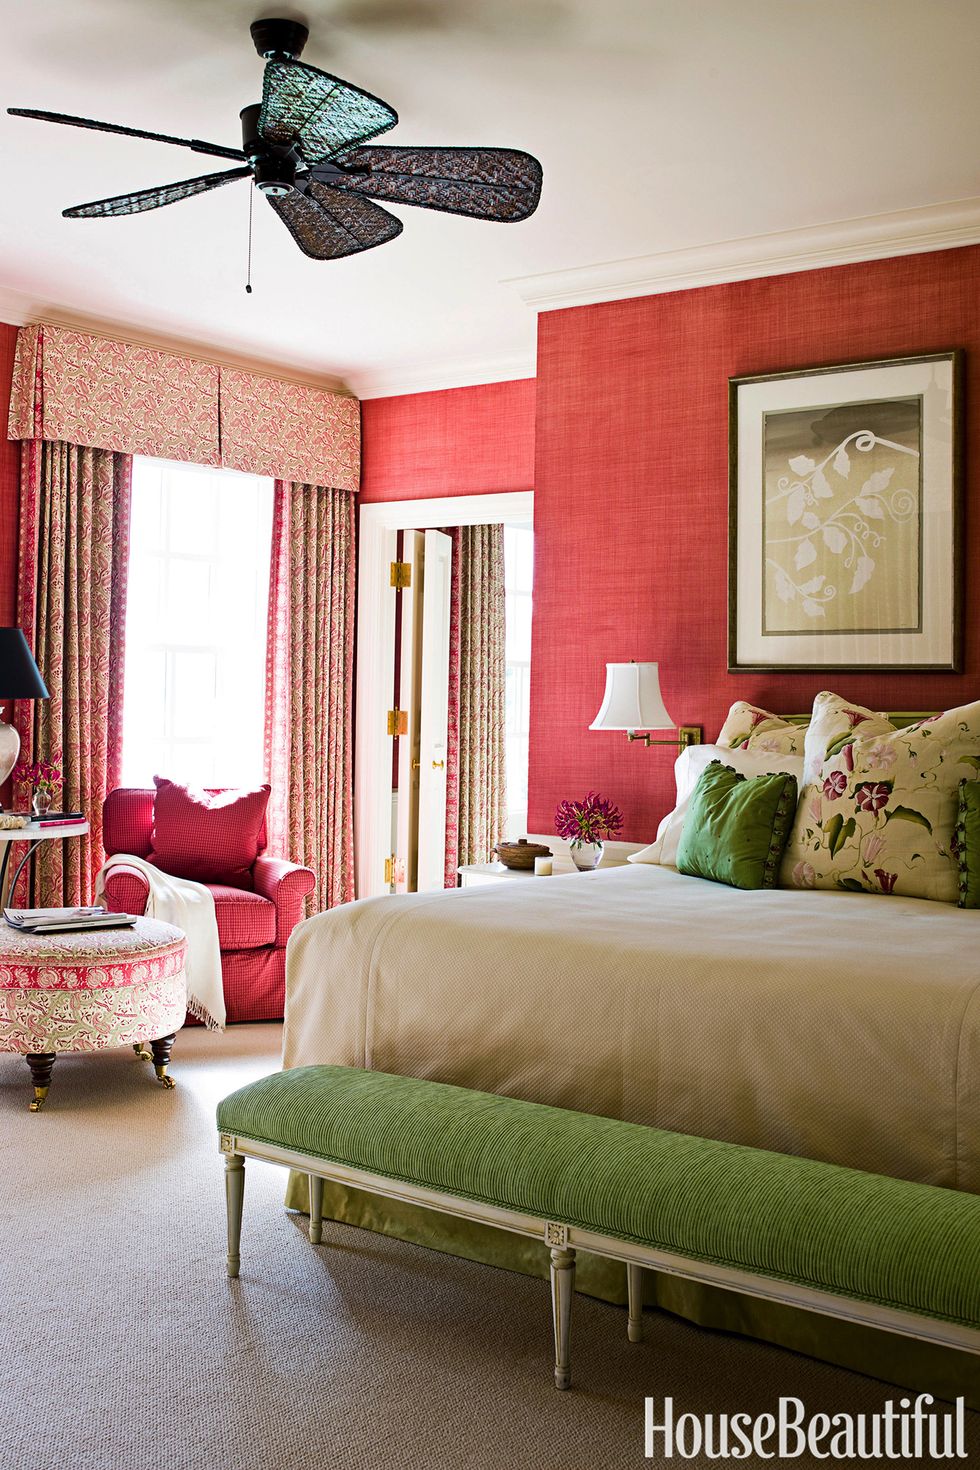 Rooms with Red Walls - Red Bedroom and Living Room Ideas